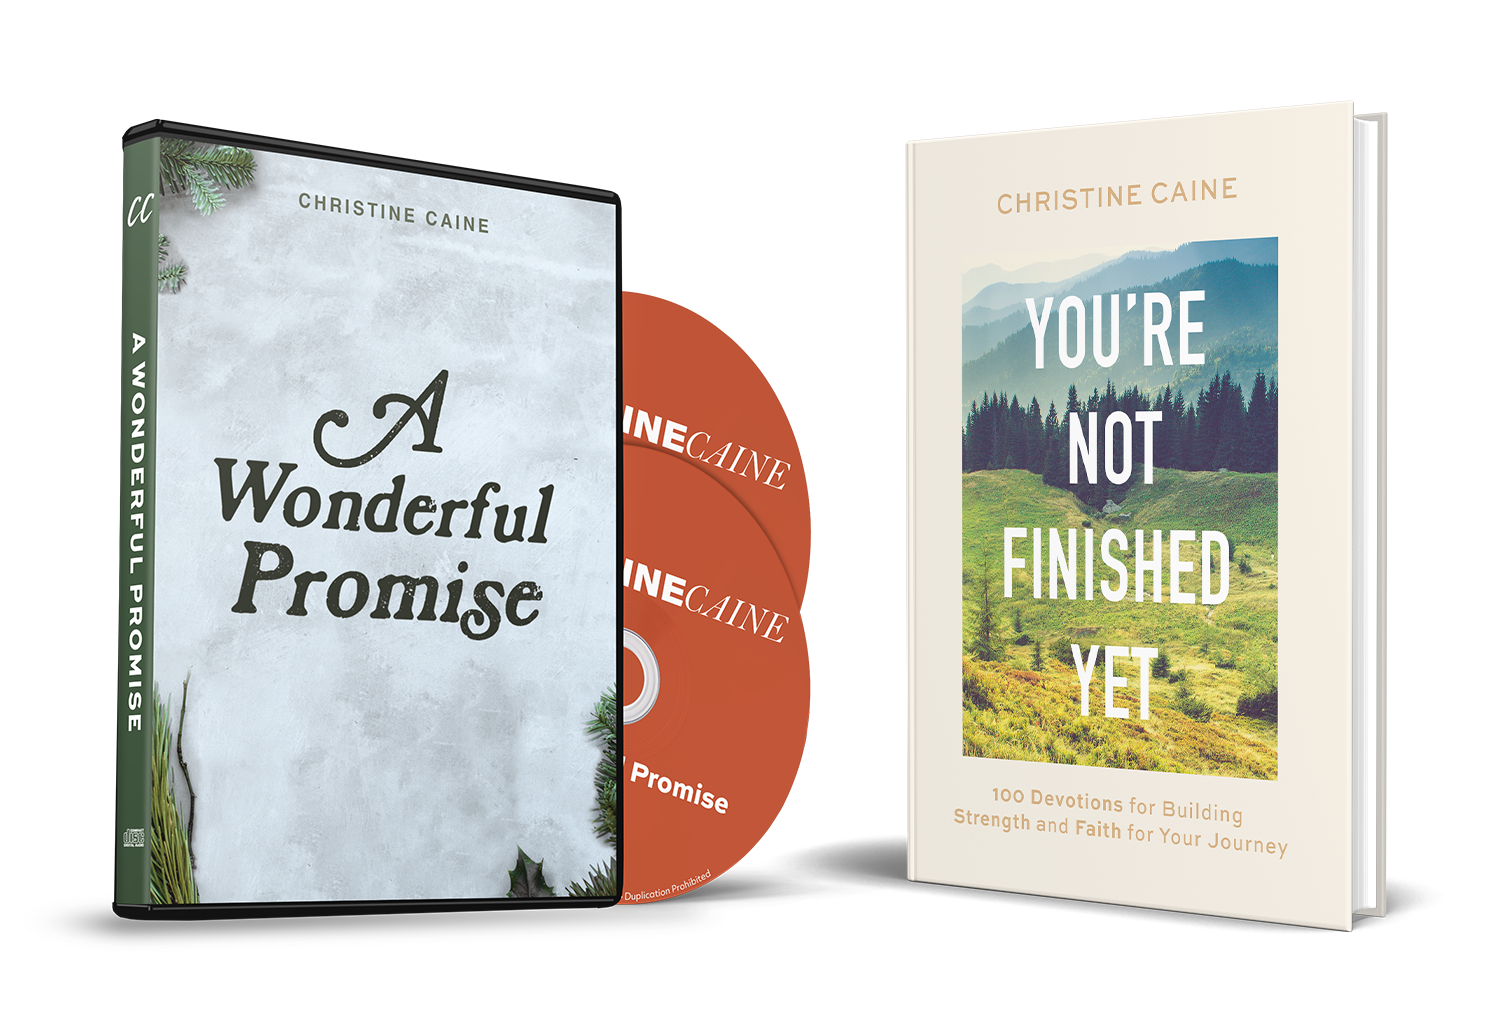 A Wonderful Promise + You're Not Finished Yet by Christine Caine by TBN